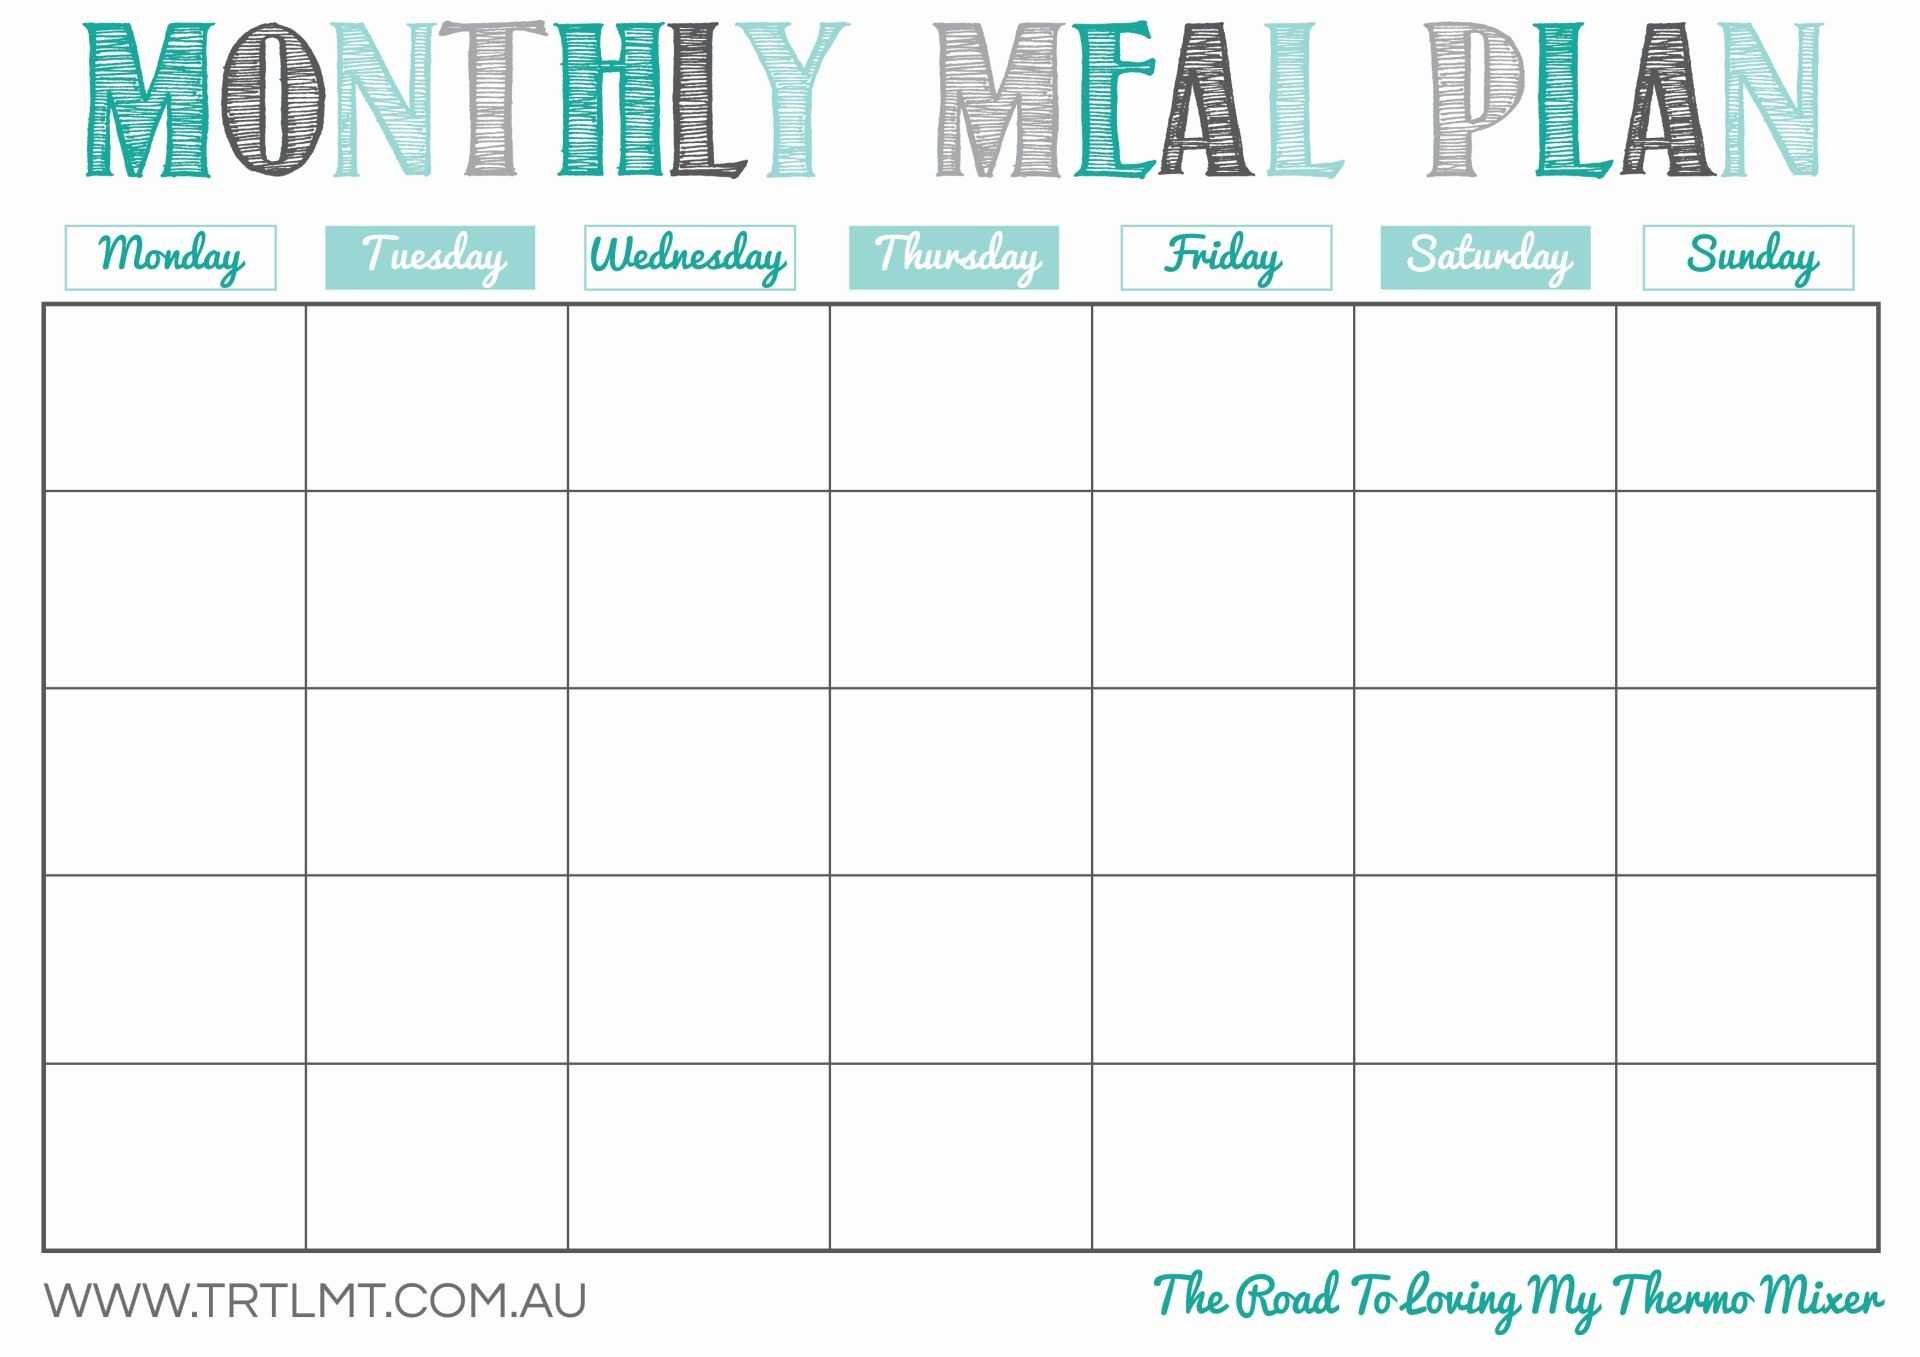 New Meal Planning Calendar Printable | Free Printable Intended For Meal Plan Template Word